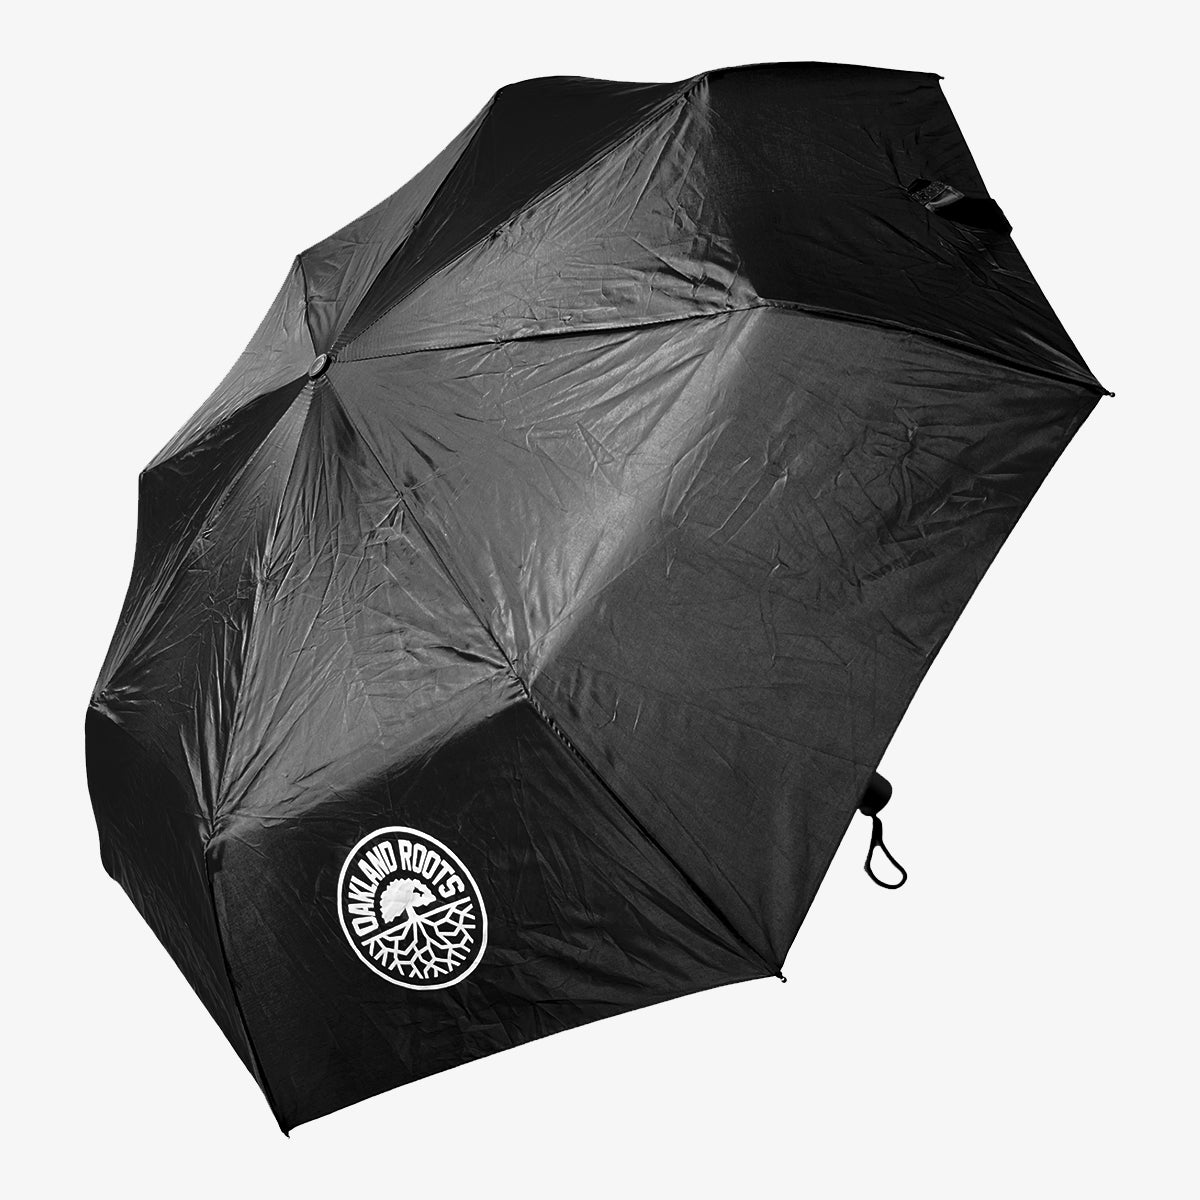 Black umbrella with round white Oakland Roots SC logo on the crown.